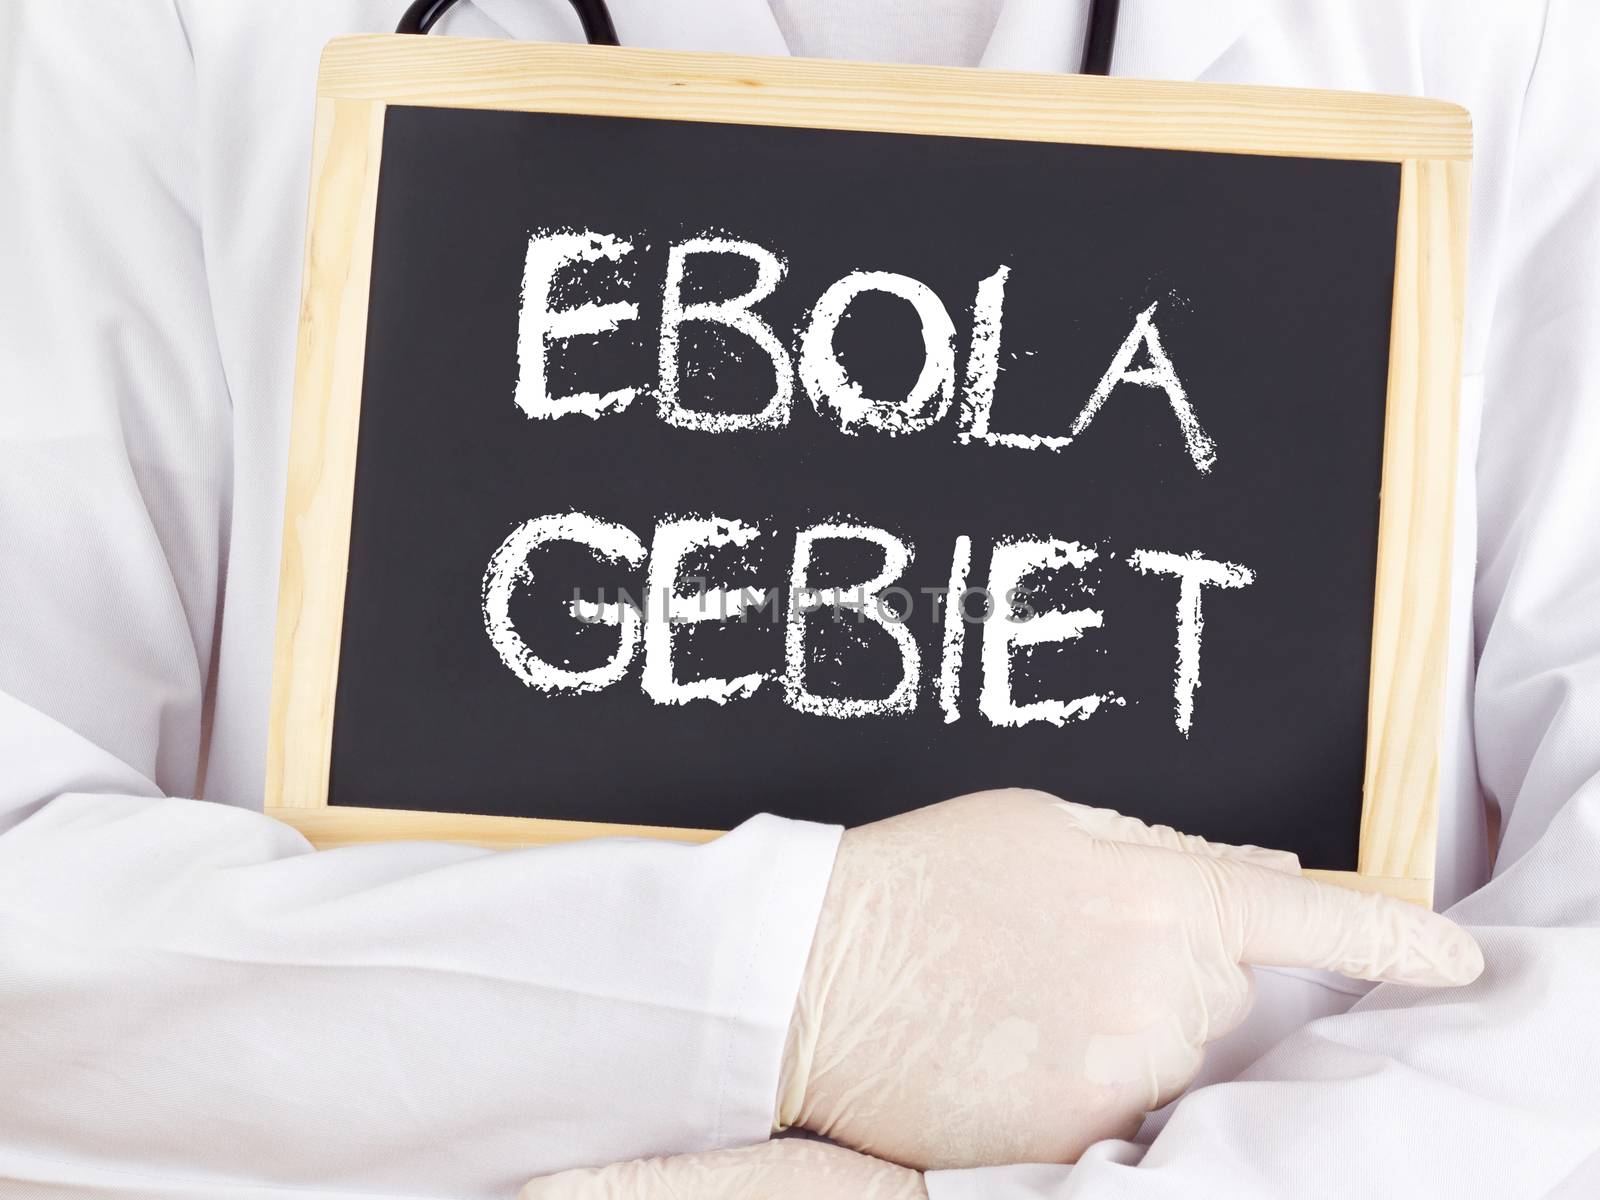 Doctor shows information: Ebola territory in german language by gwolters